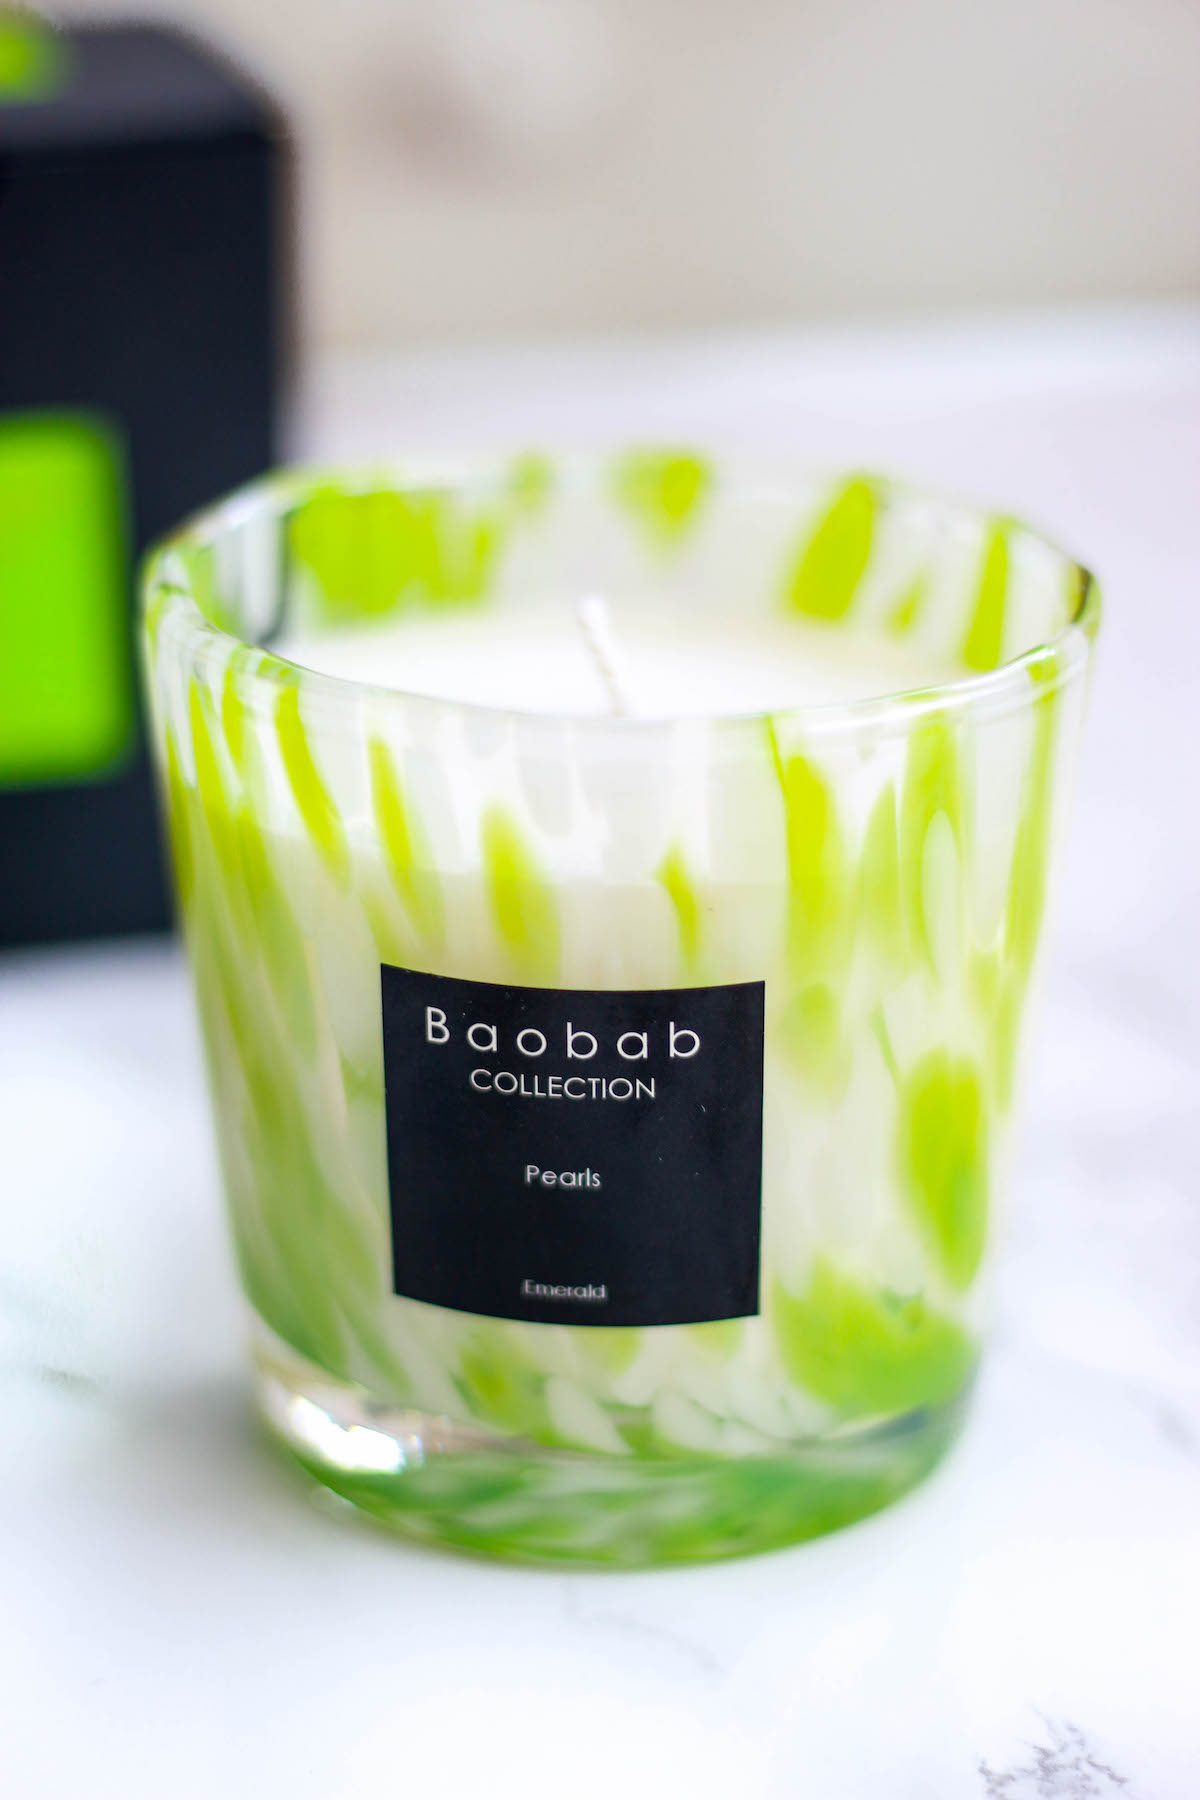 Baobab Collection – Pearls Emerald Kerze